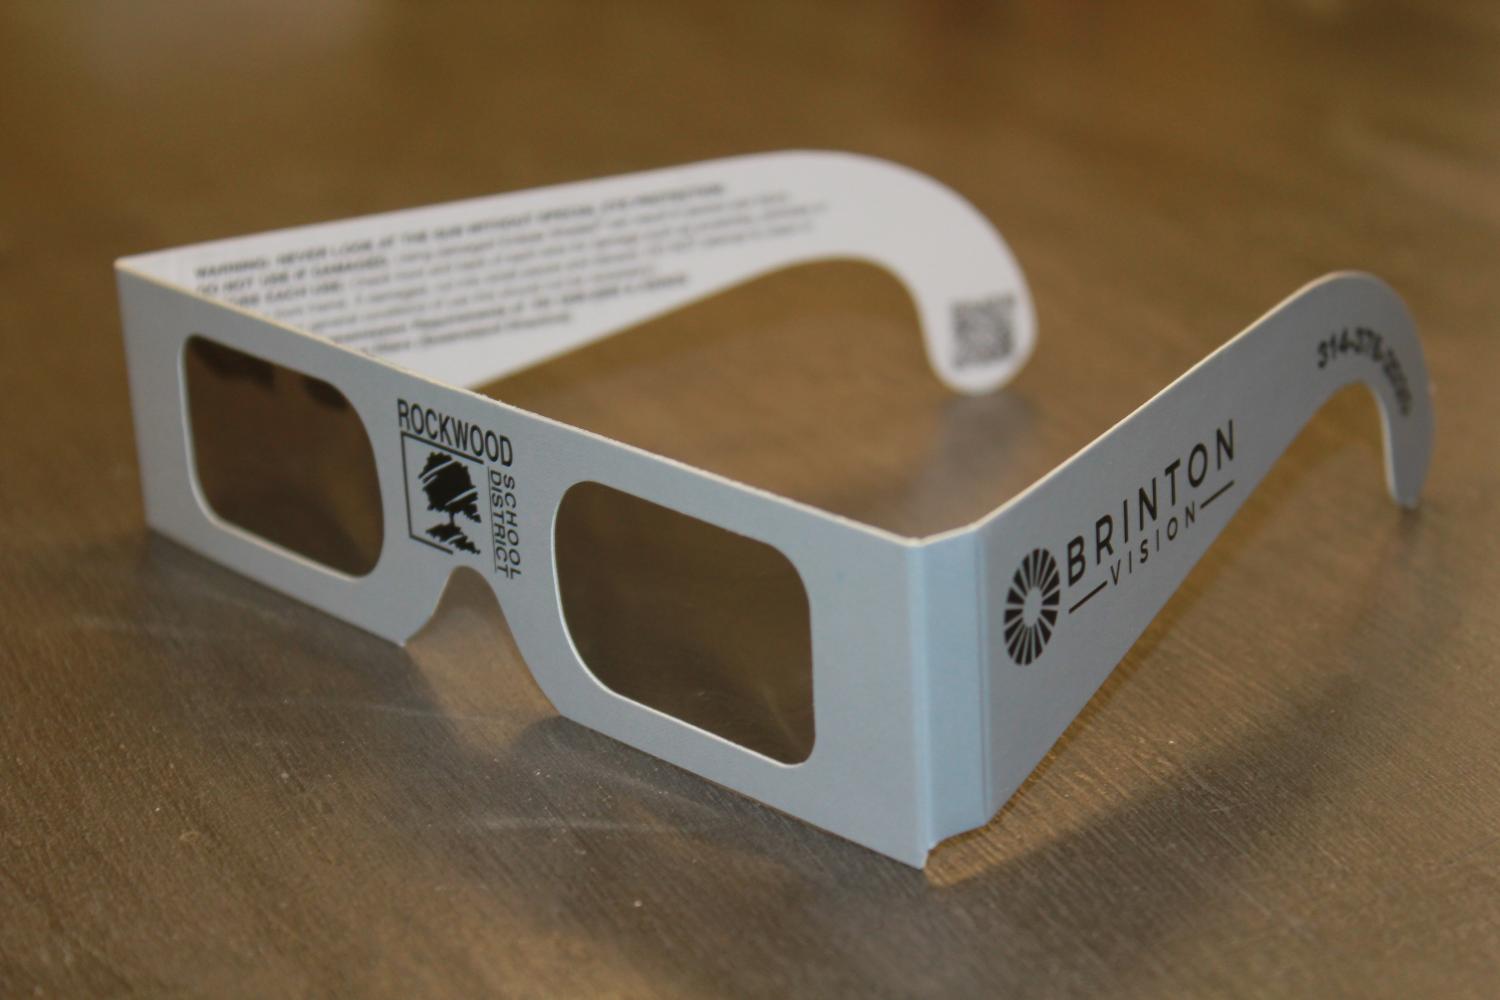 Rockwood will hand out solar filter glasses at the beginning of 6th hour.